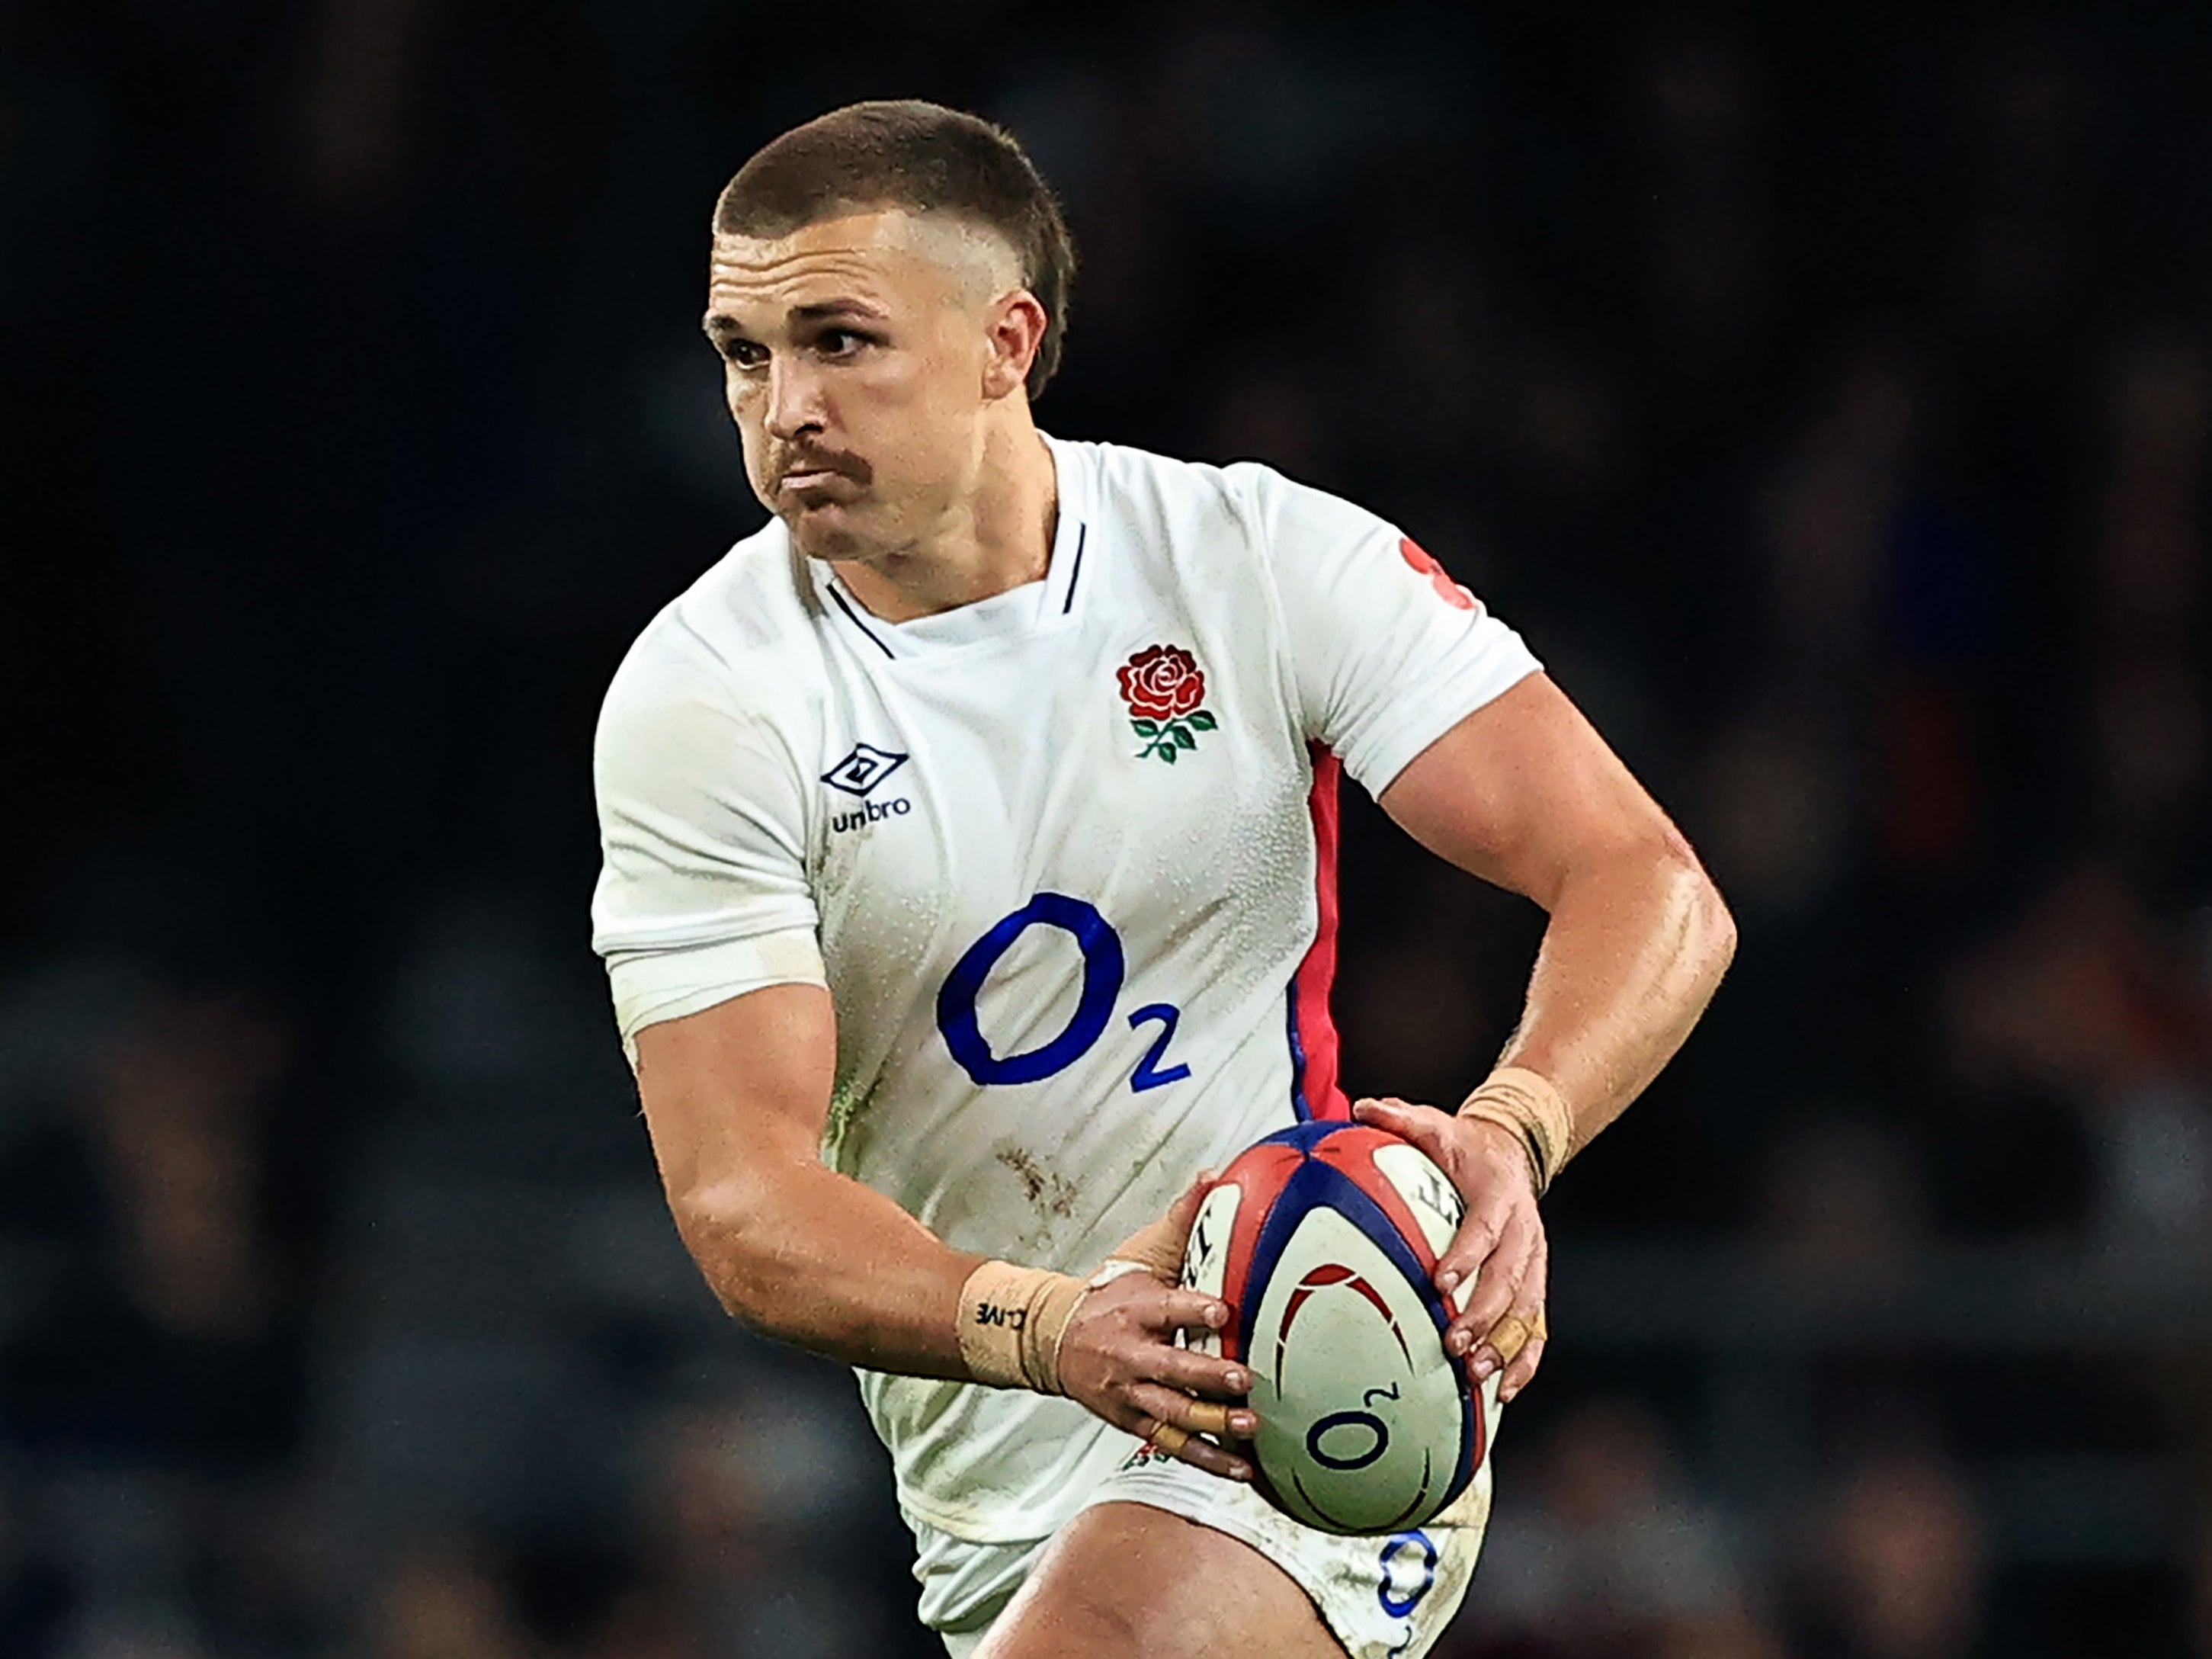 Slade will be available for England’s Six Nations trip to France